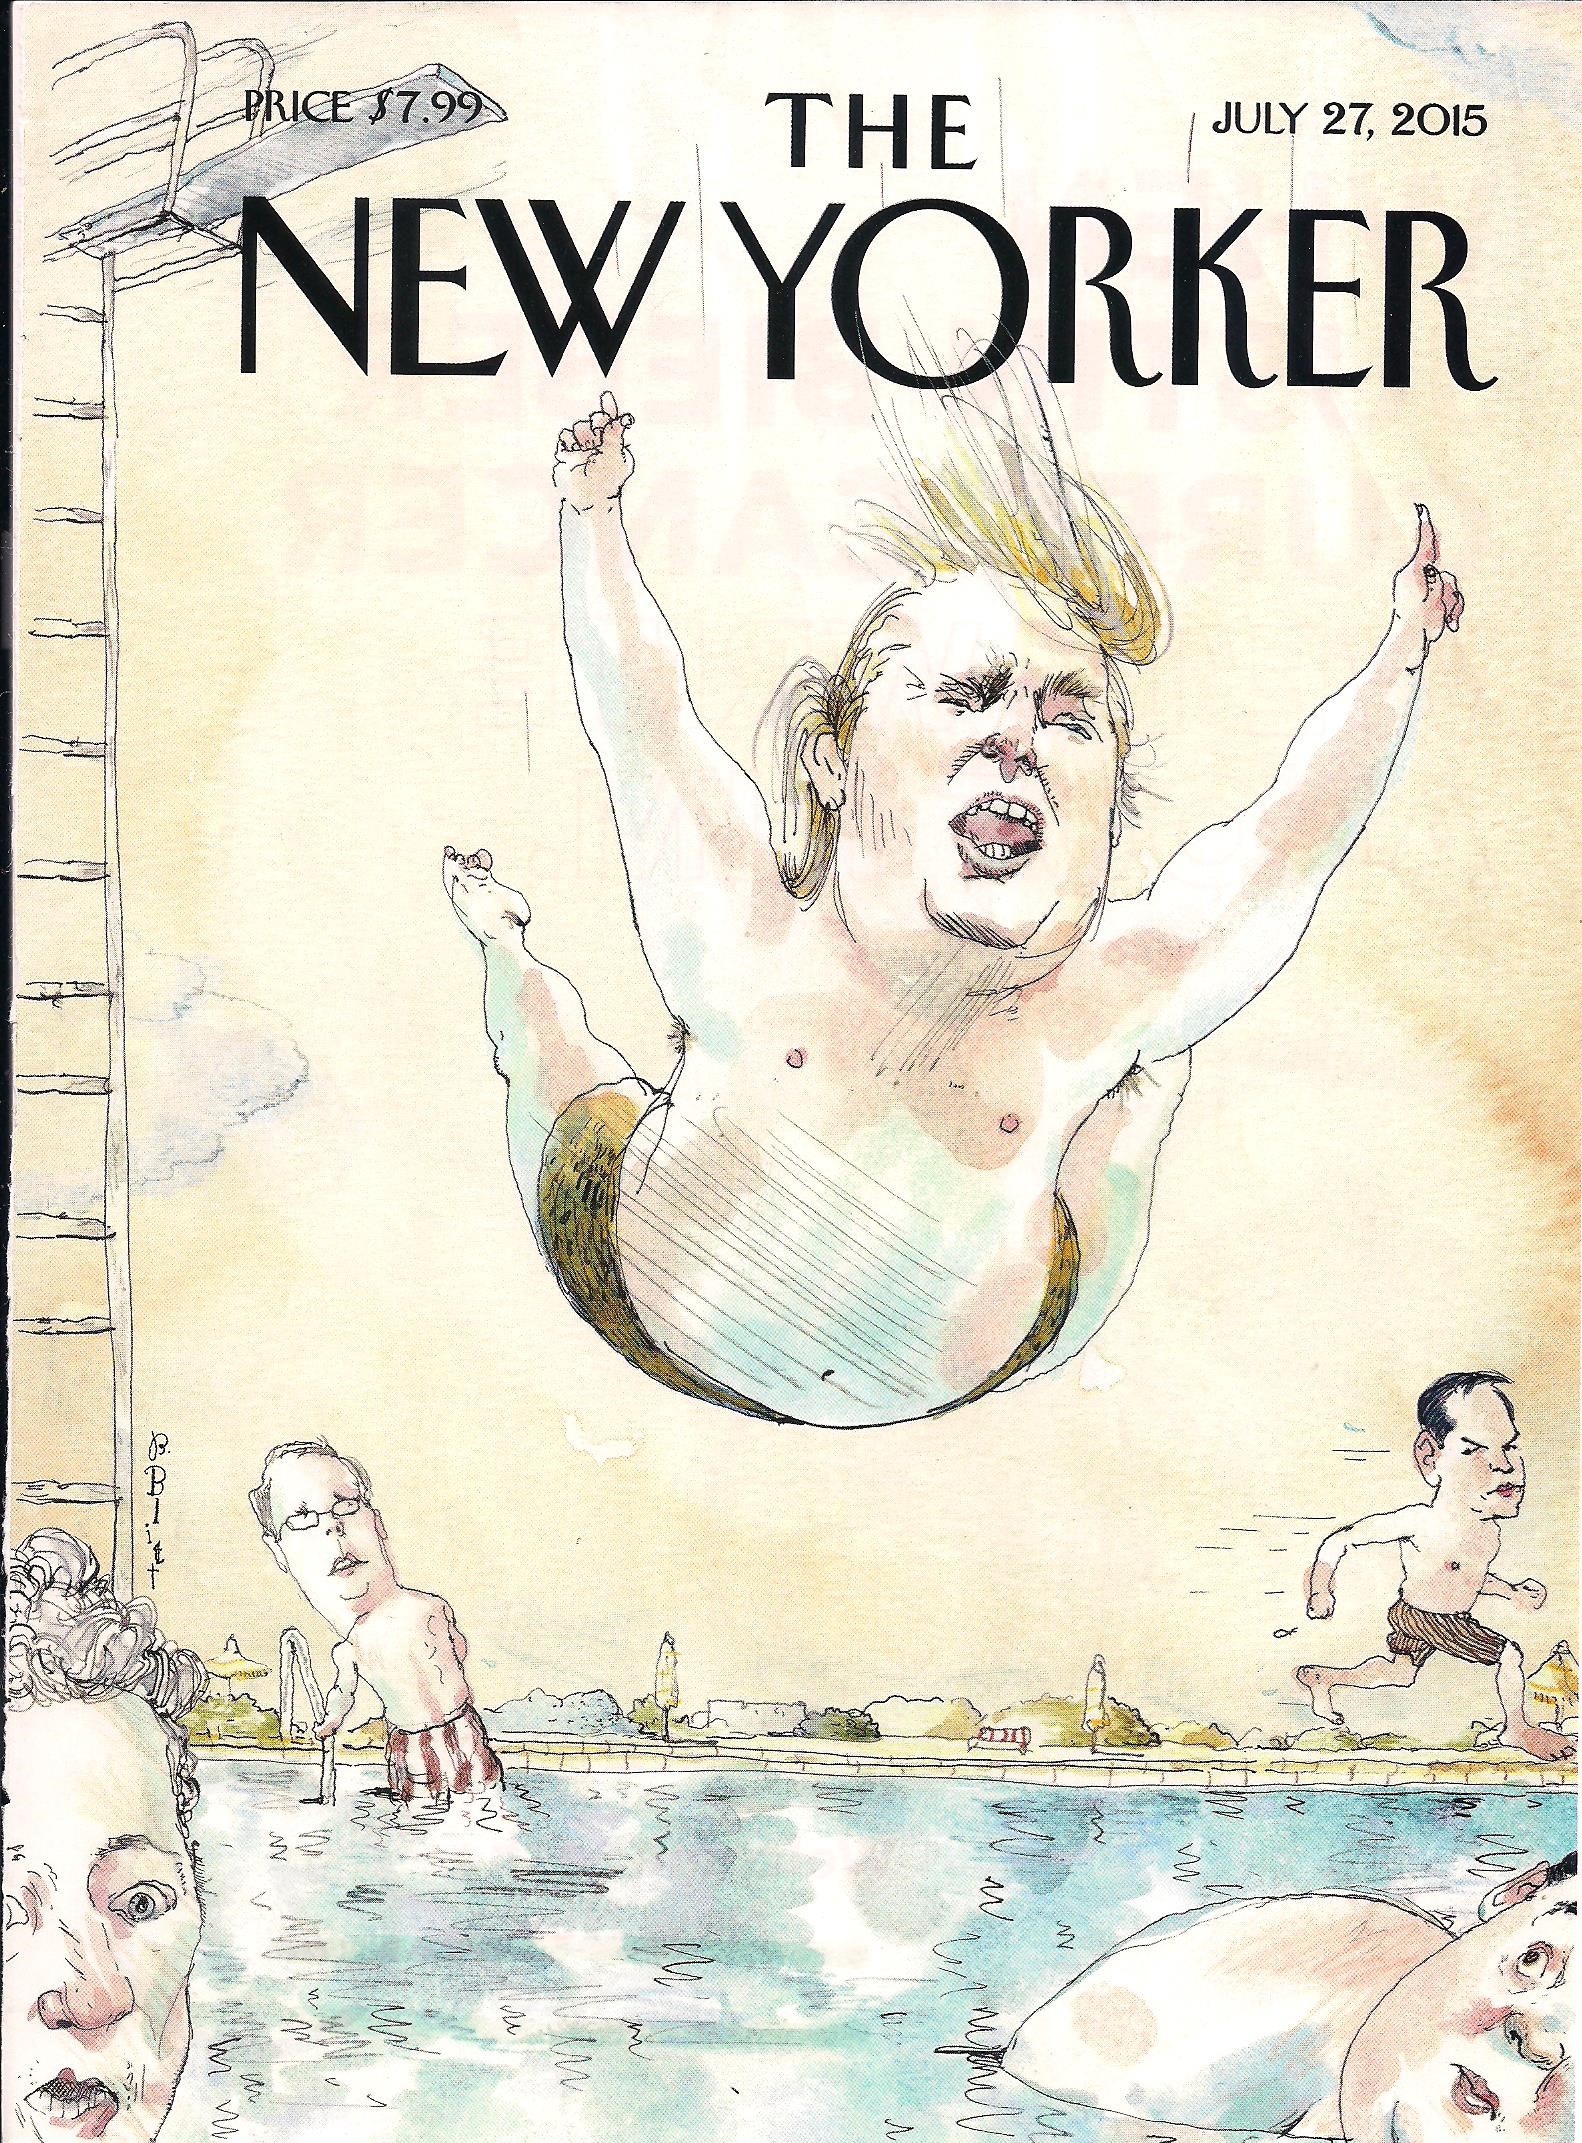 The New Yorker July 27, 2015